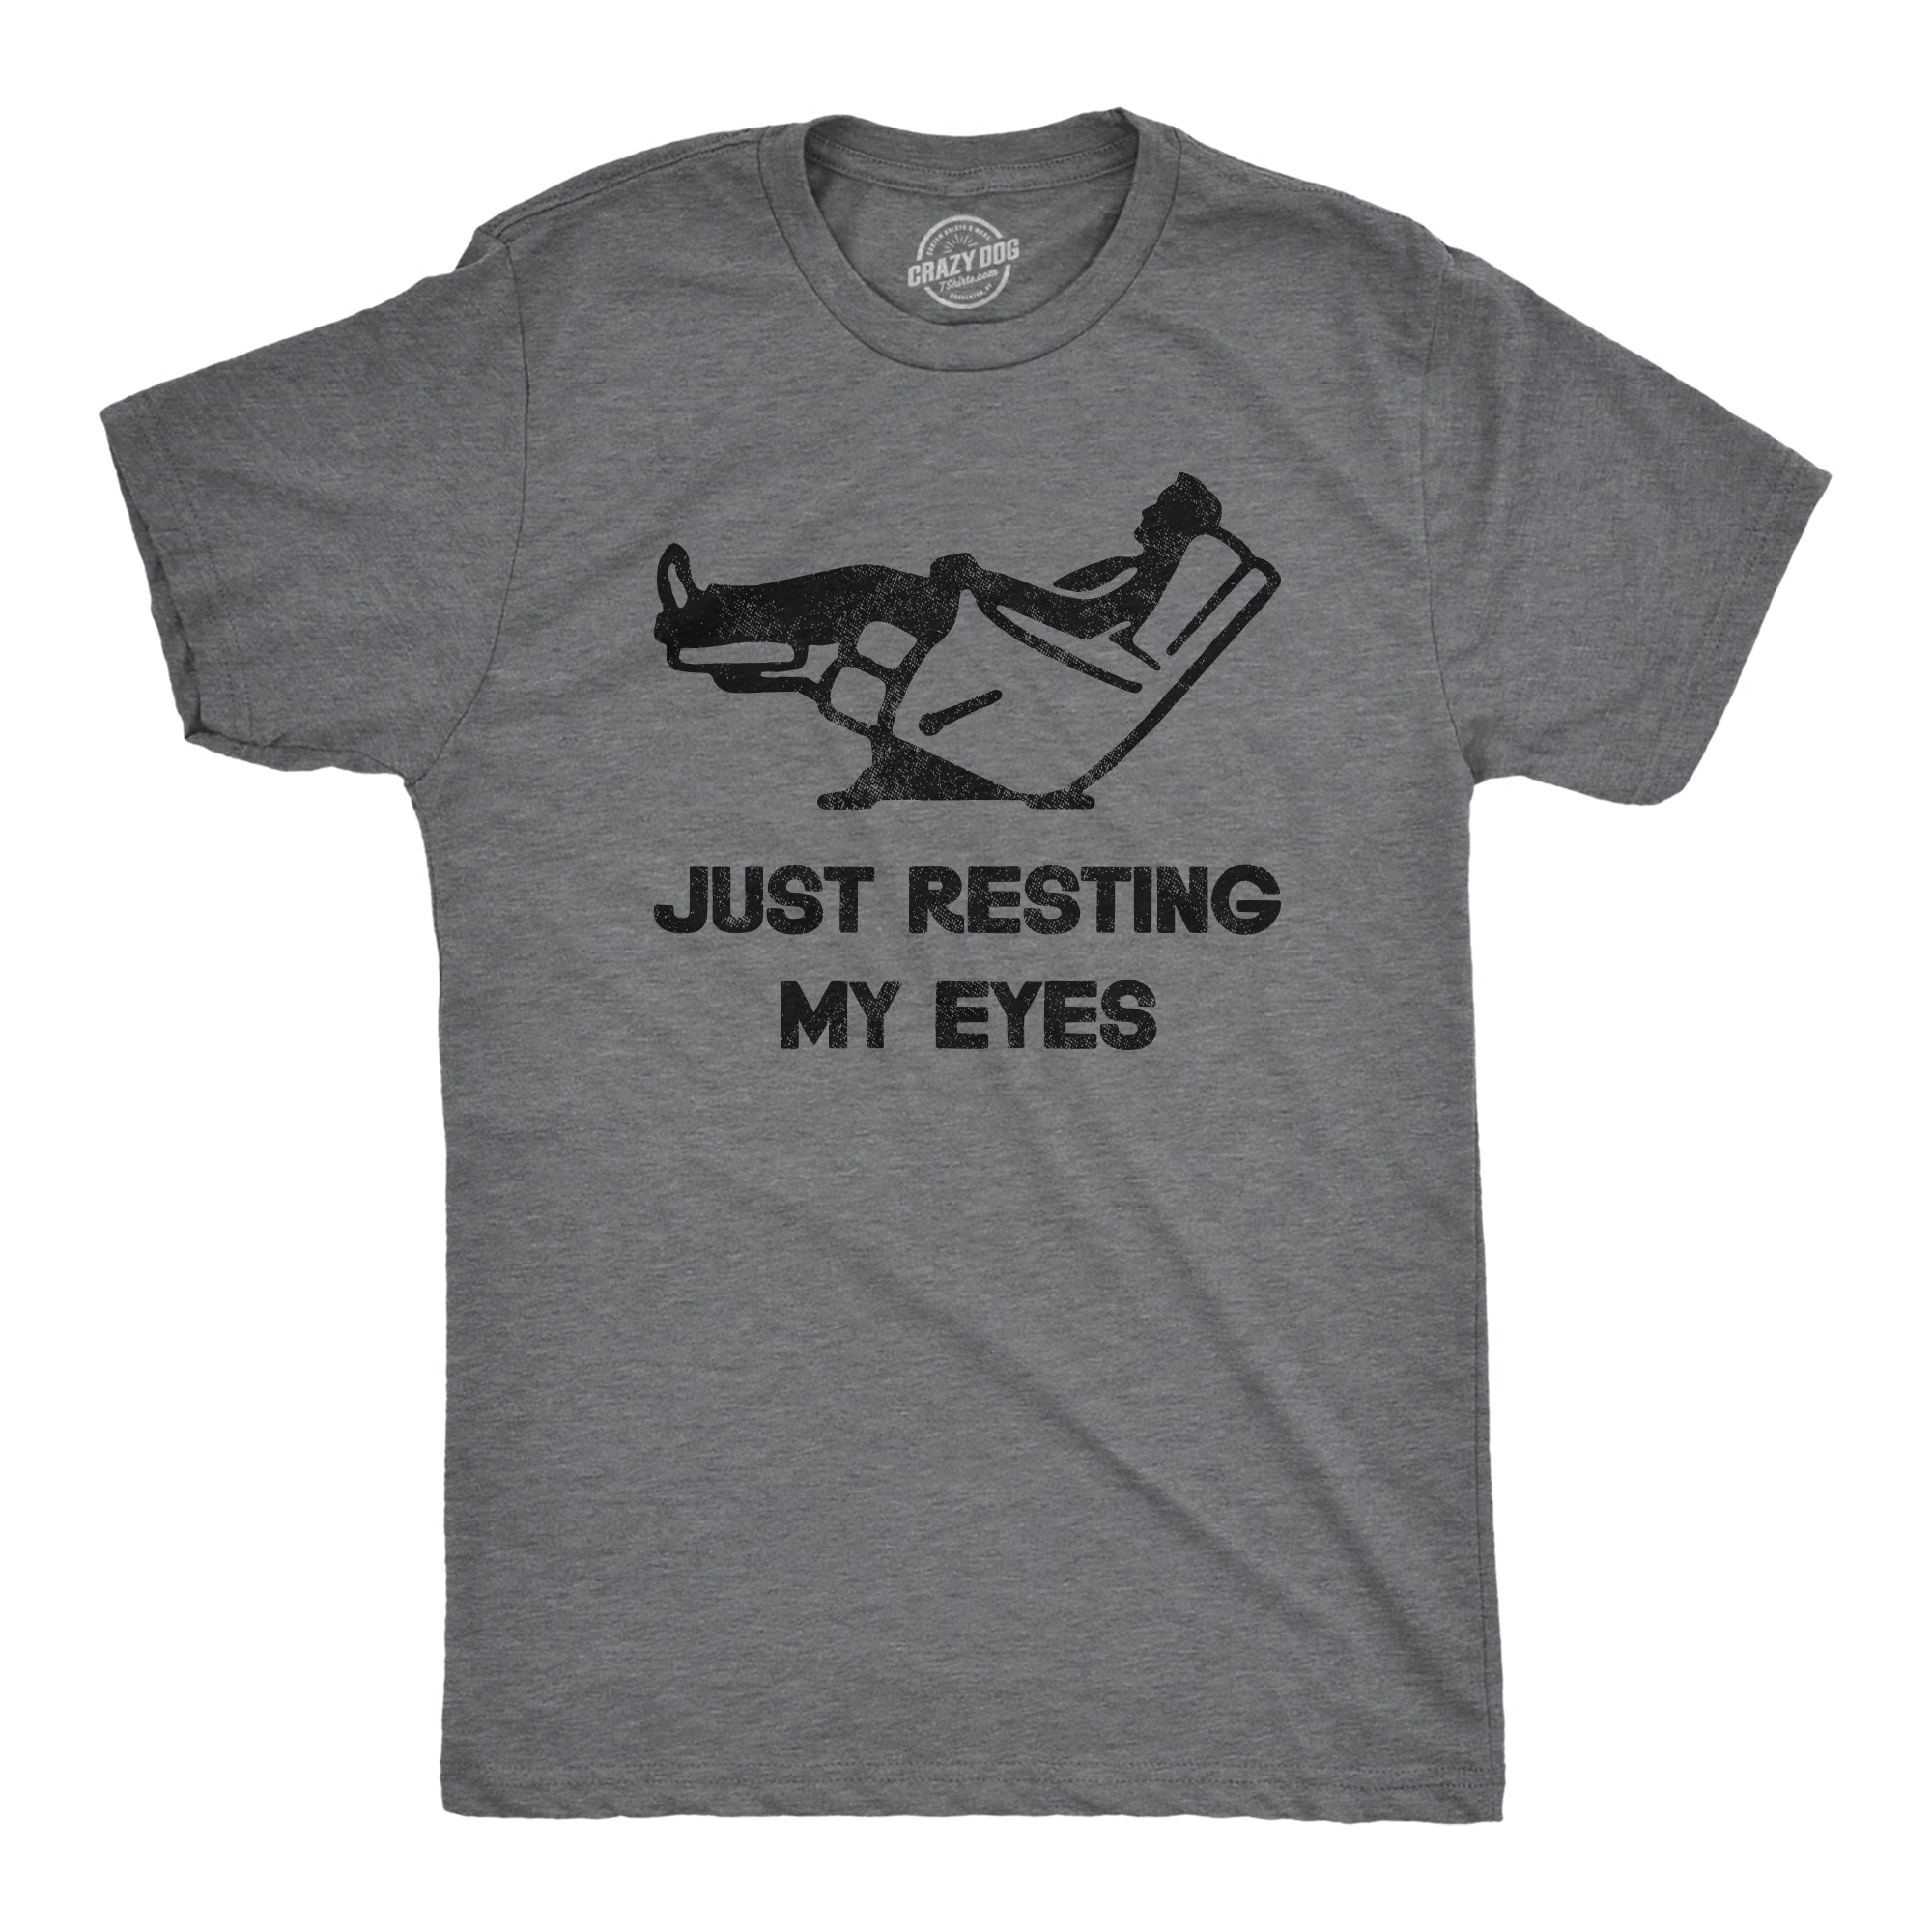 Funny Dark Heather Grey Just Resting My Eyes Mens T Shirt Nerdy Father's Day Sarcastic Tee